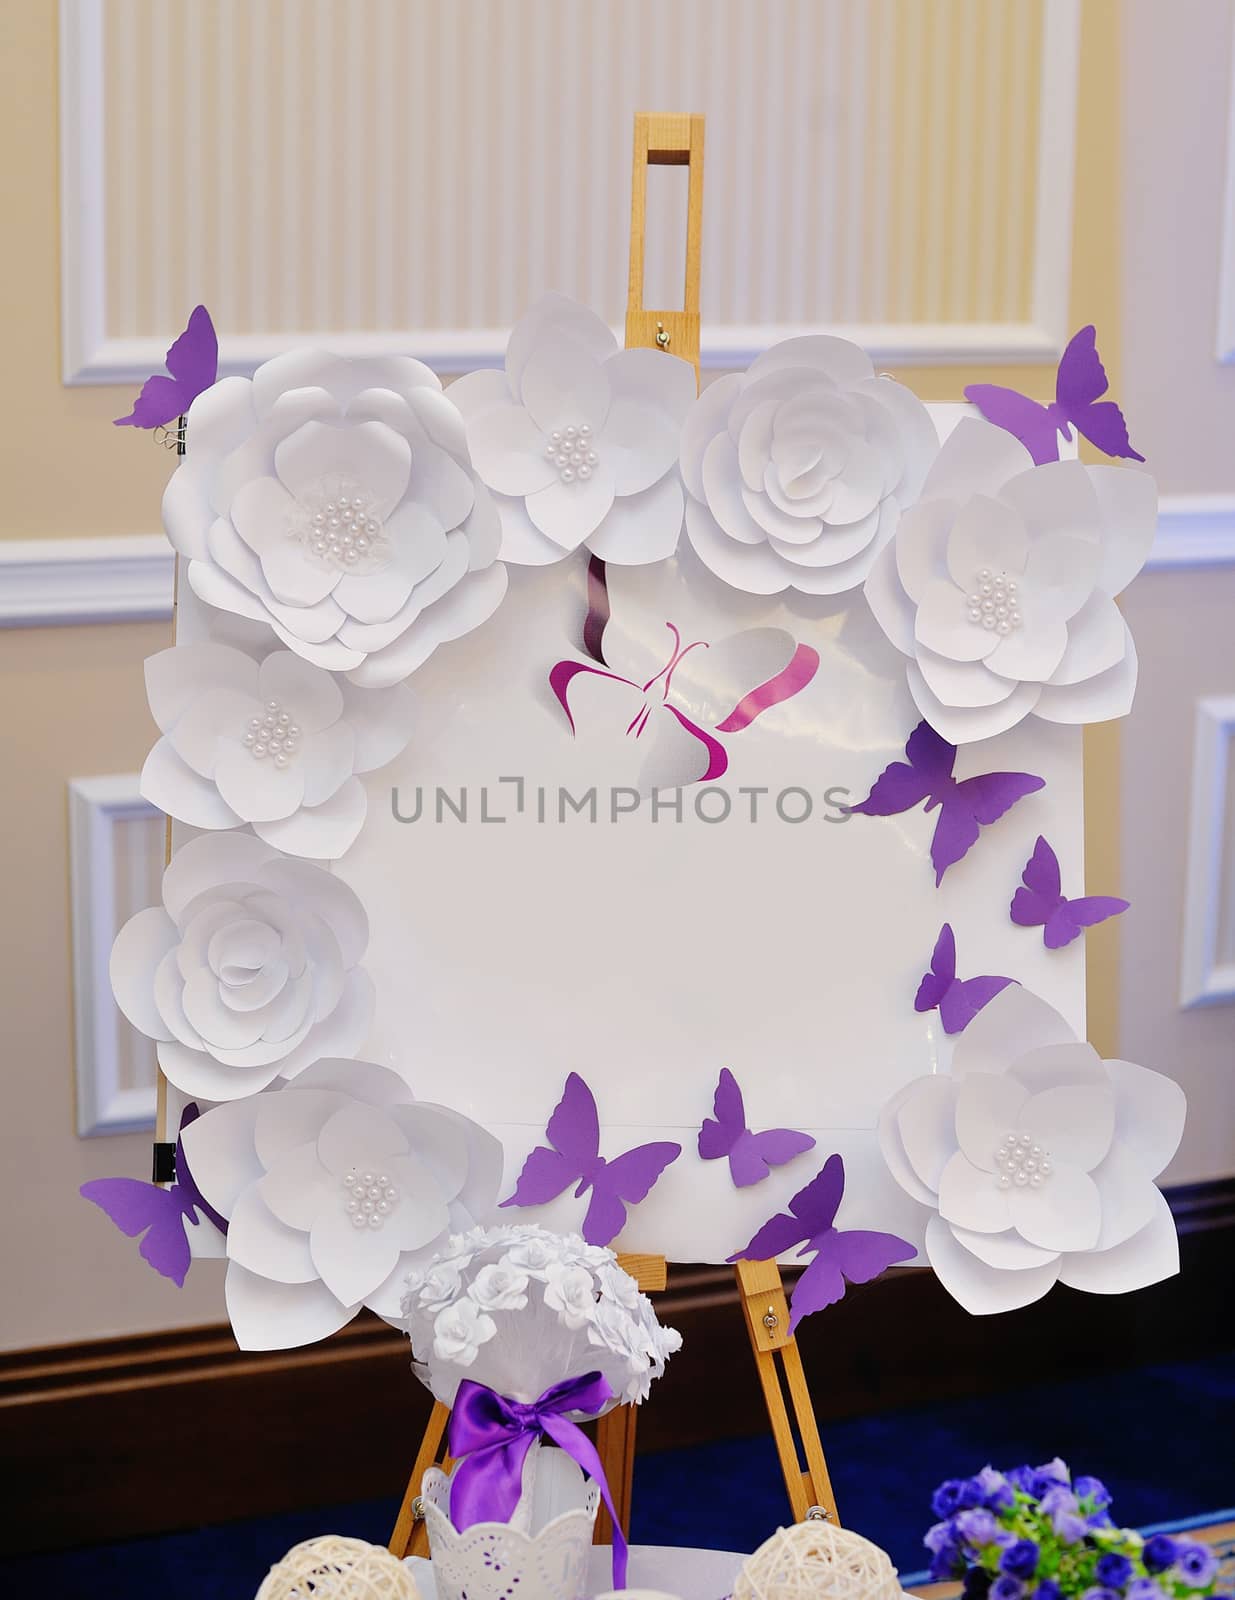 beautiful wedding board with paper flowers on light background.